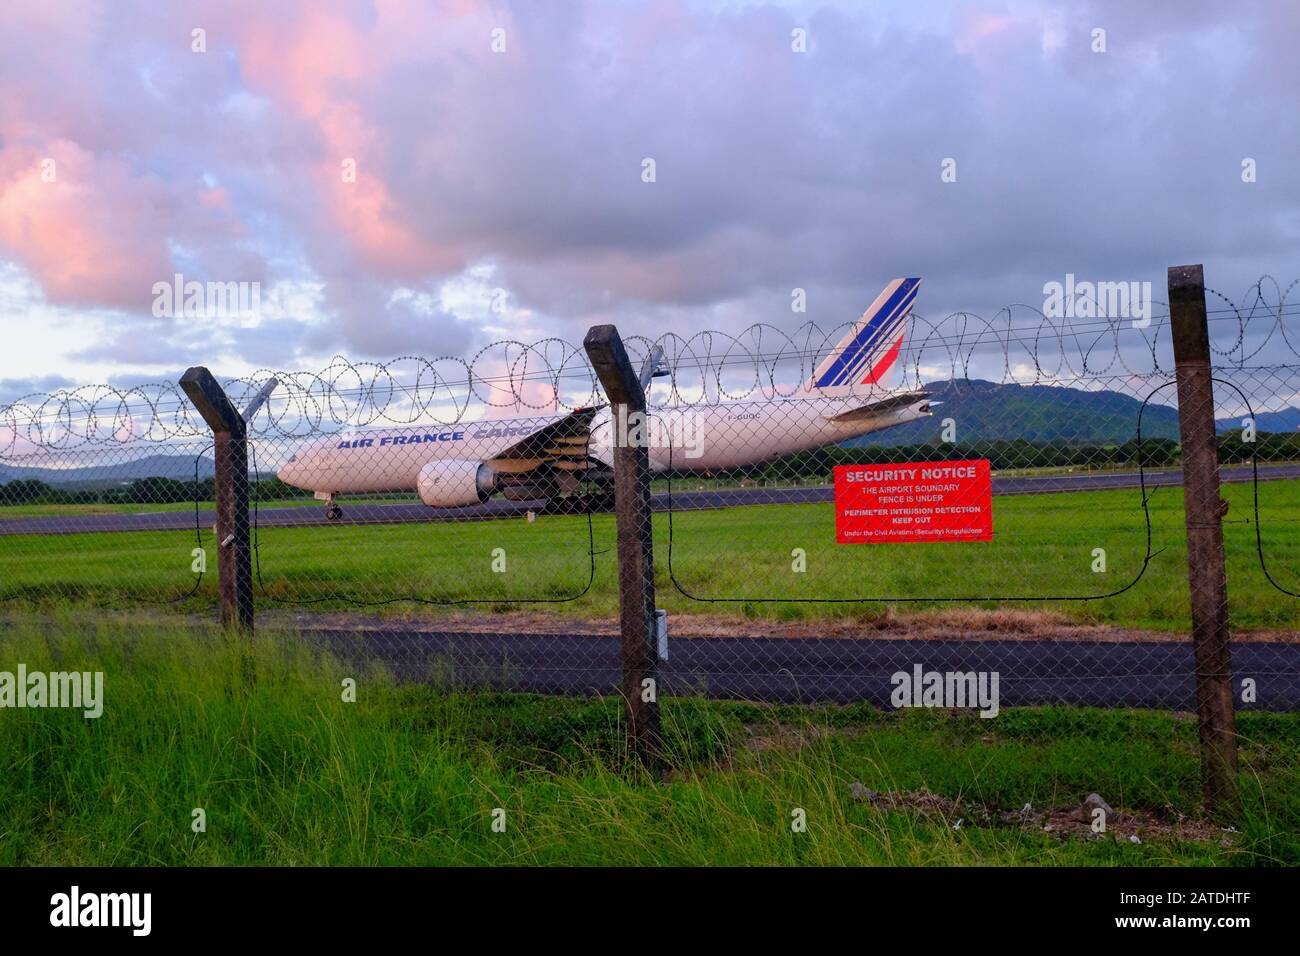 An Air France Cargo jet prepares to take off from the Sir Seewoosagur Ramgoolam International Airport in Mauritius Stock Photo